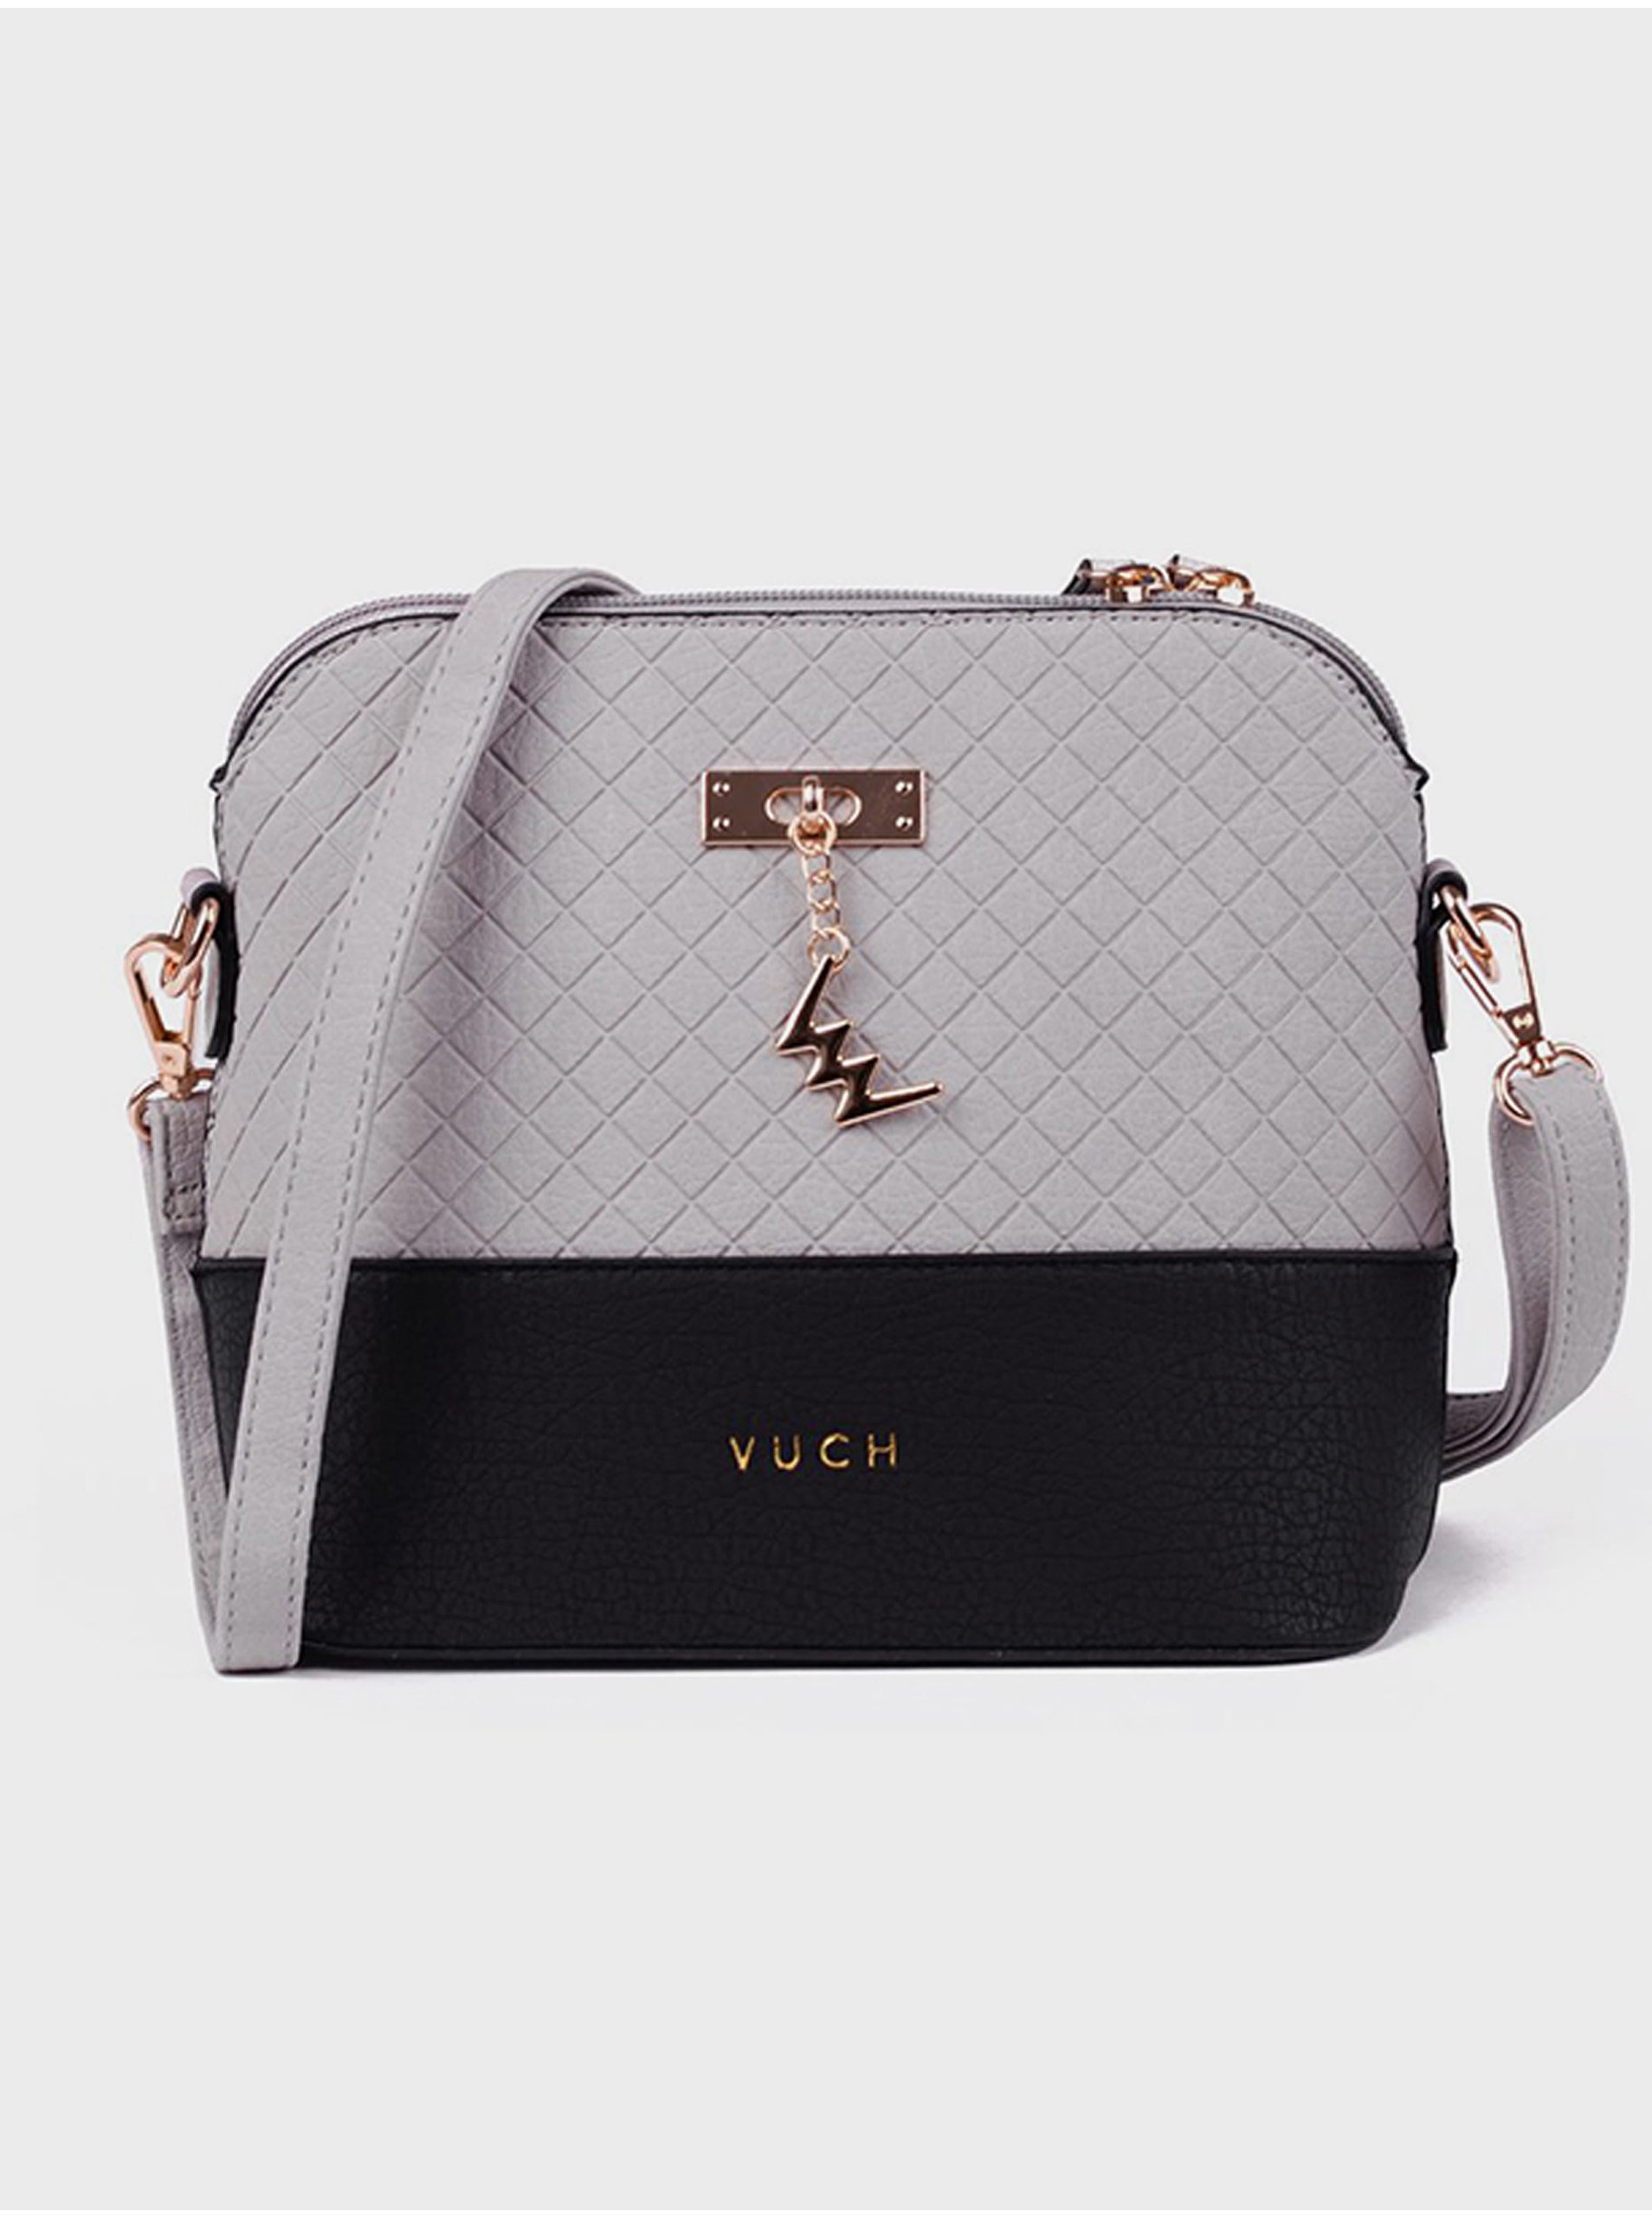 Lacno Vuch crossbody kabelka Carrie